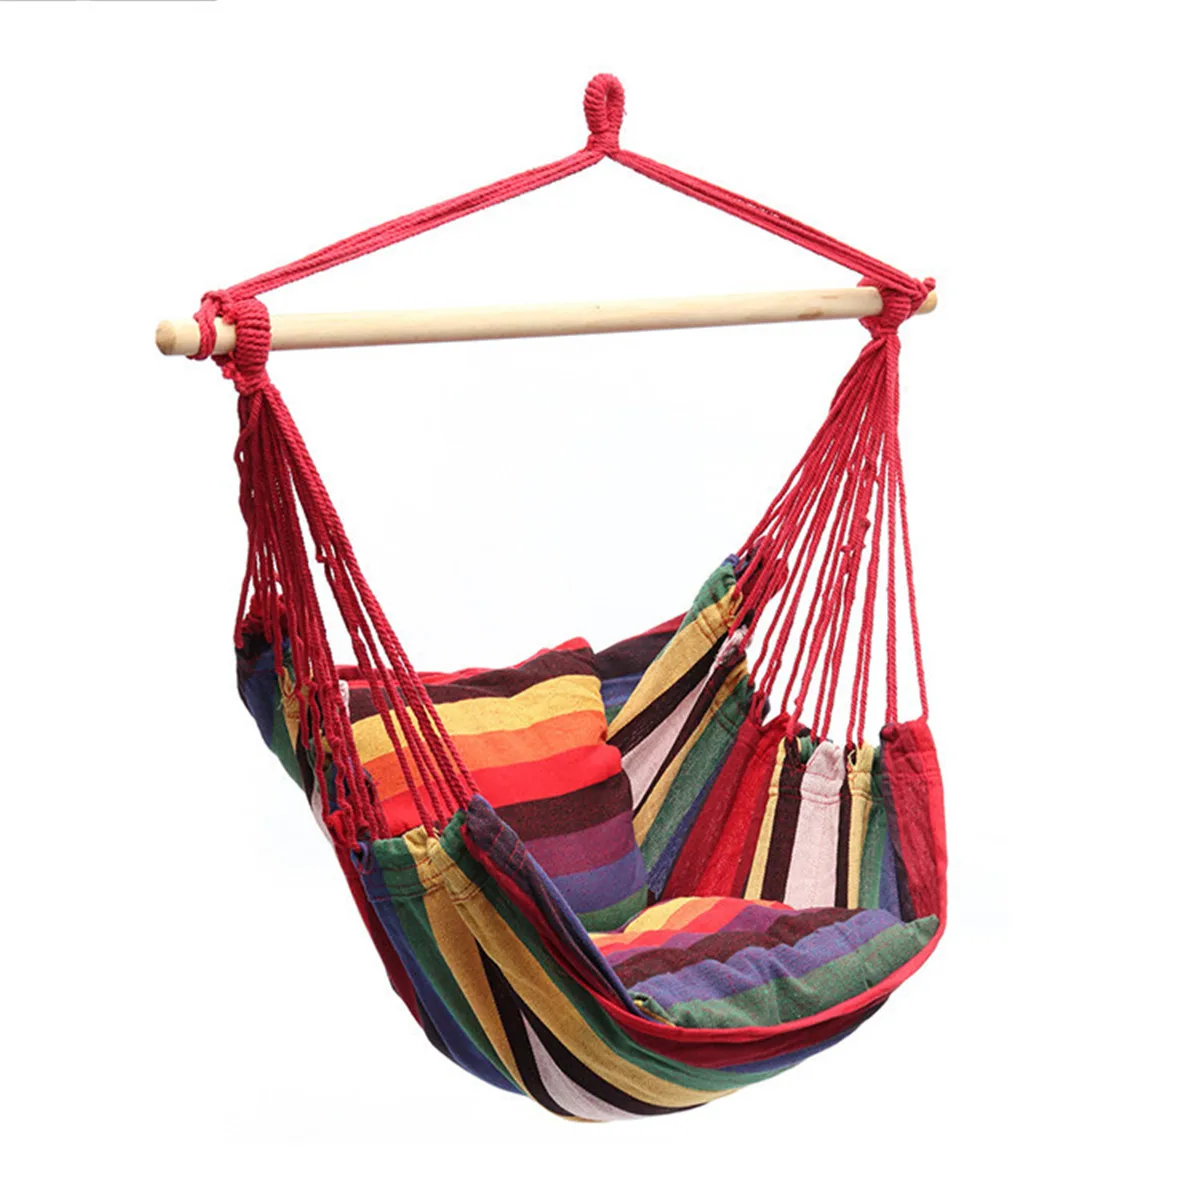 

New Portable Hammock Chair Hanging Rope Chair Swing Chair Seat with 2 Pillows for Garden Indoor Outdoor Hammock Swings